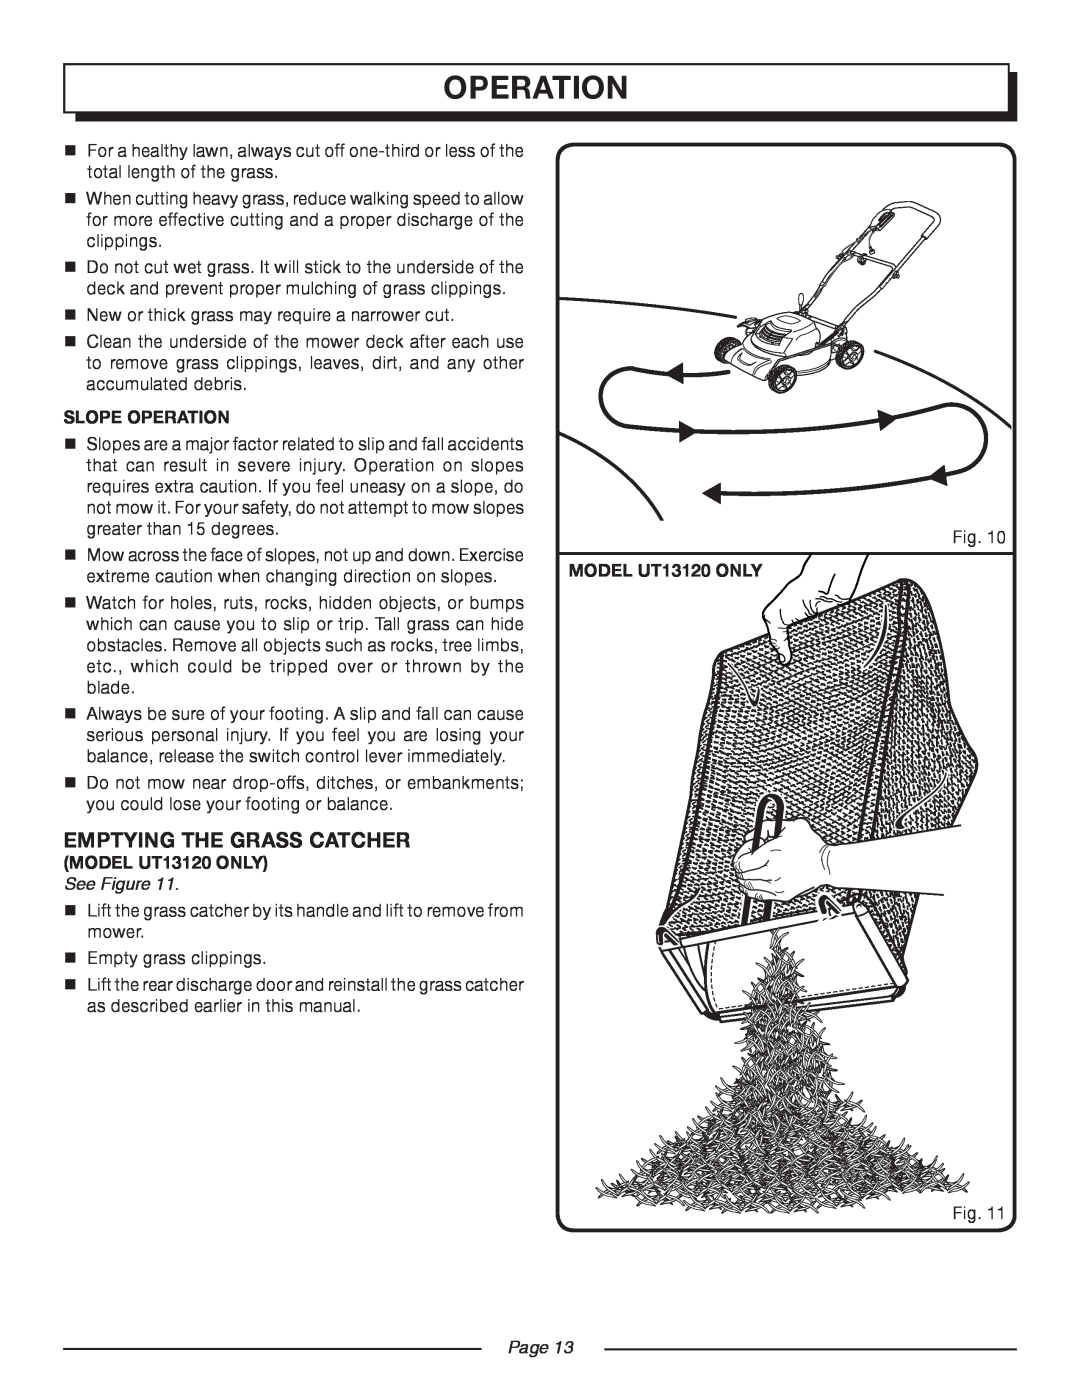 Homelite UT13118 manual Slope Operation, EMPTYING THE GRASS CATCHER MODEL UT13120 ONLY, See Figure, Page 